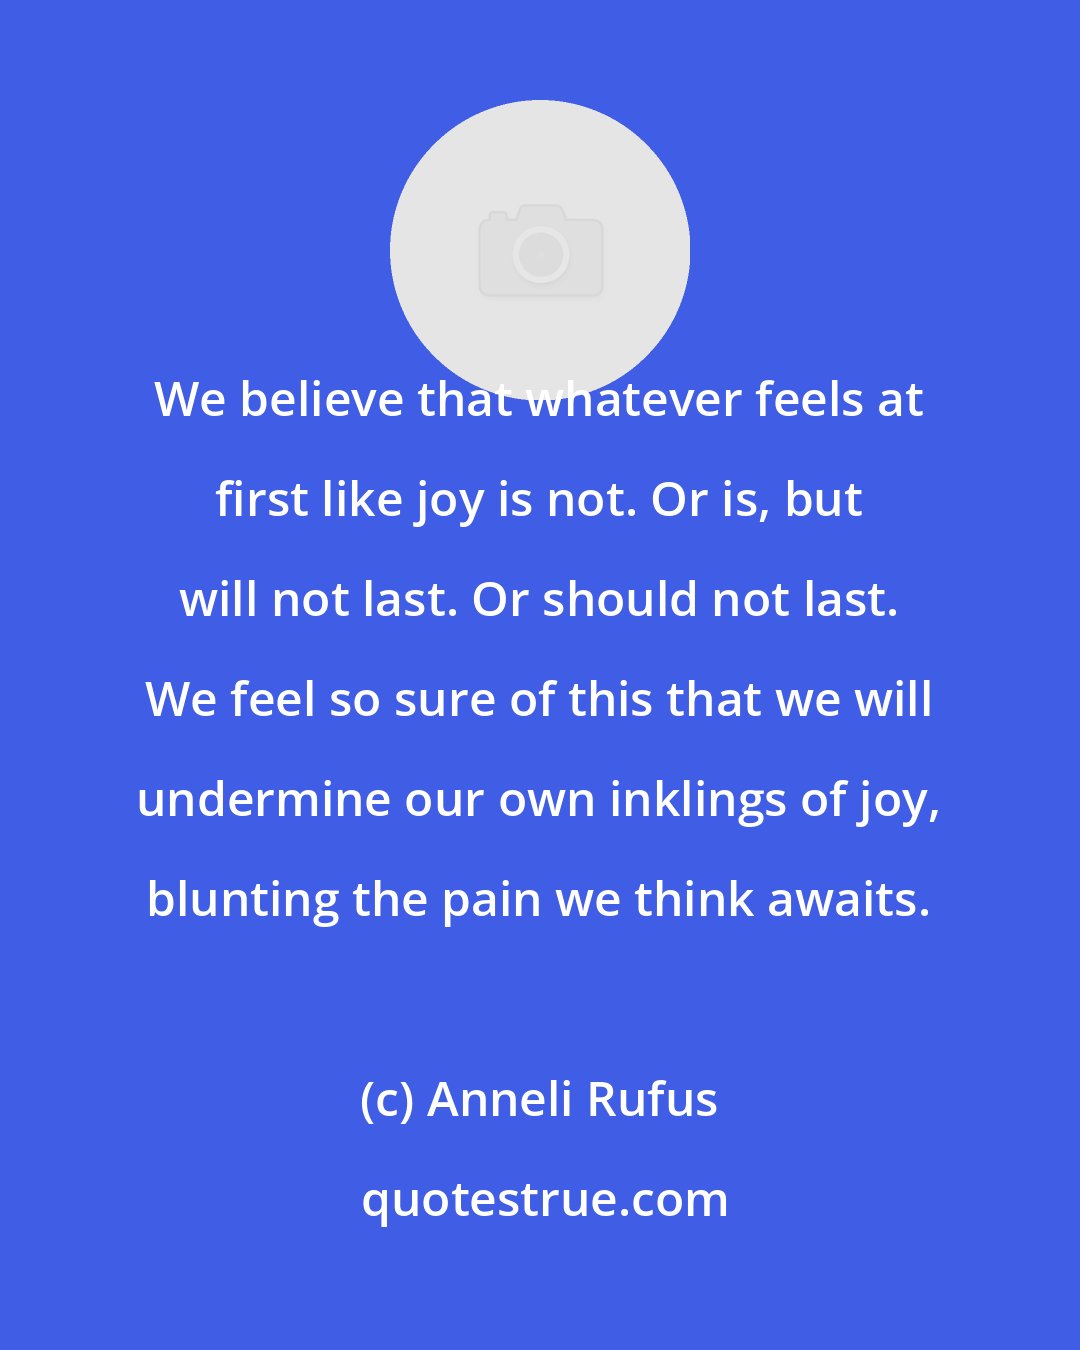 Anneli Rufus: We believe that whatever feels at first like joy is not. Or is, but will not last. Or should not last. We feel so sure of this that we will undermine our own inklings of joy, blunting the pain we think awaits.